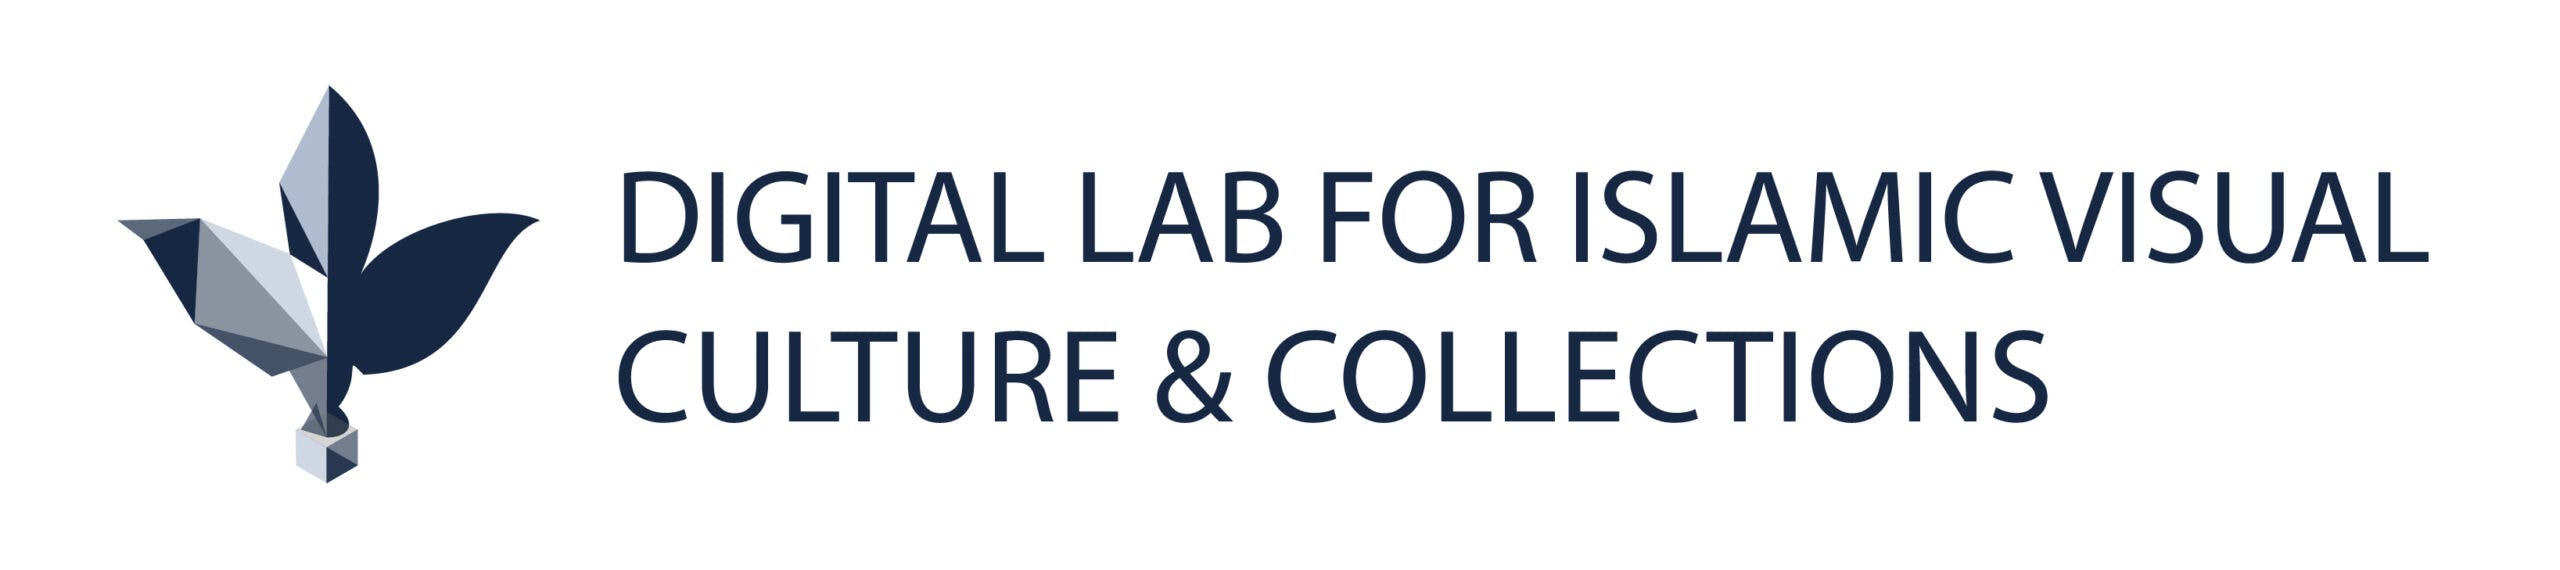 Digital Lab for Islamic Visual Culture & Collections full logo